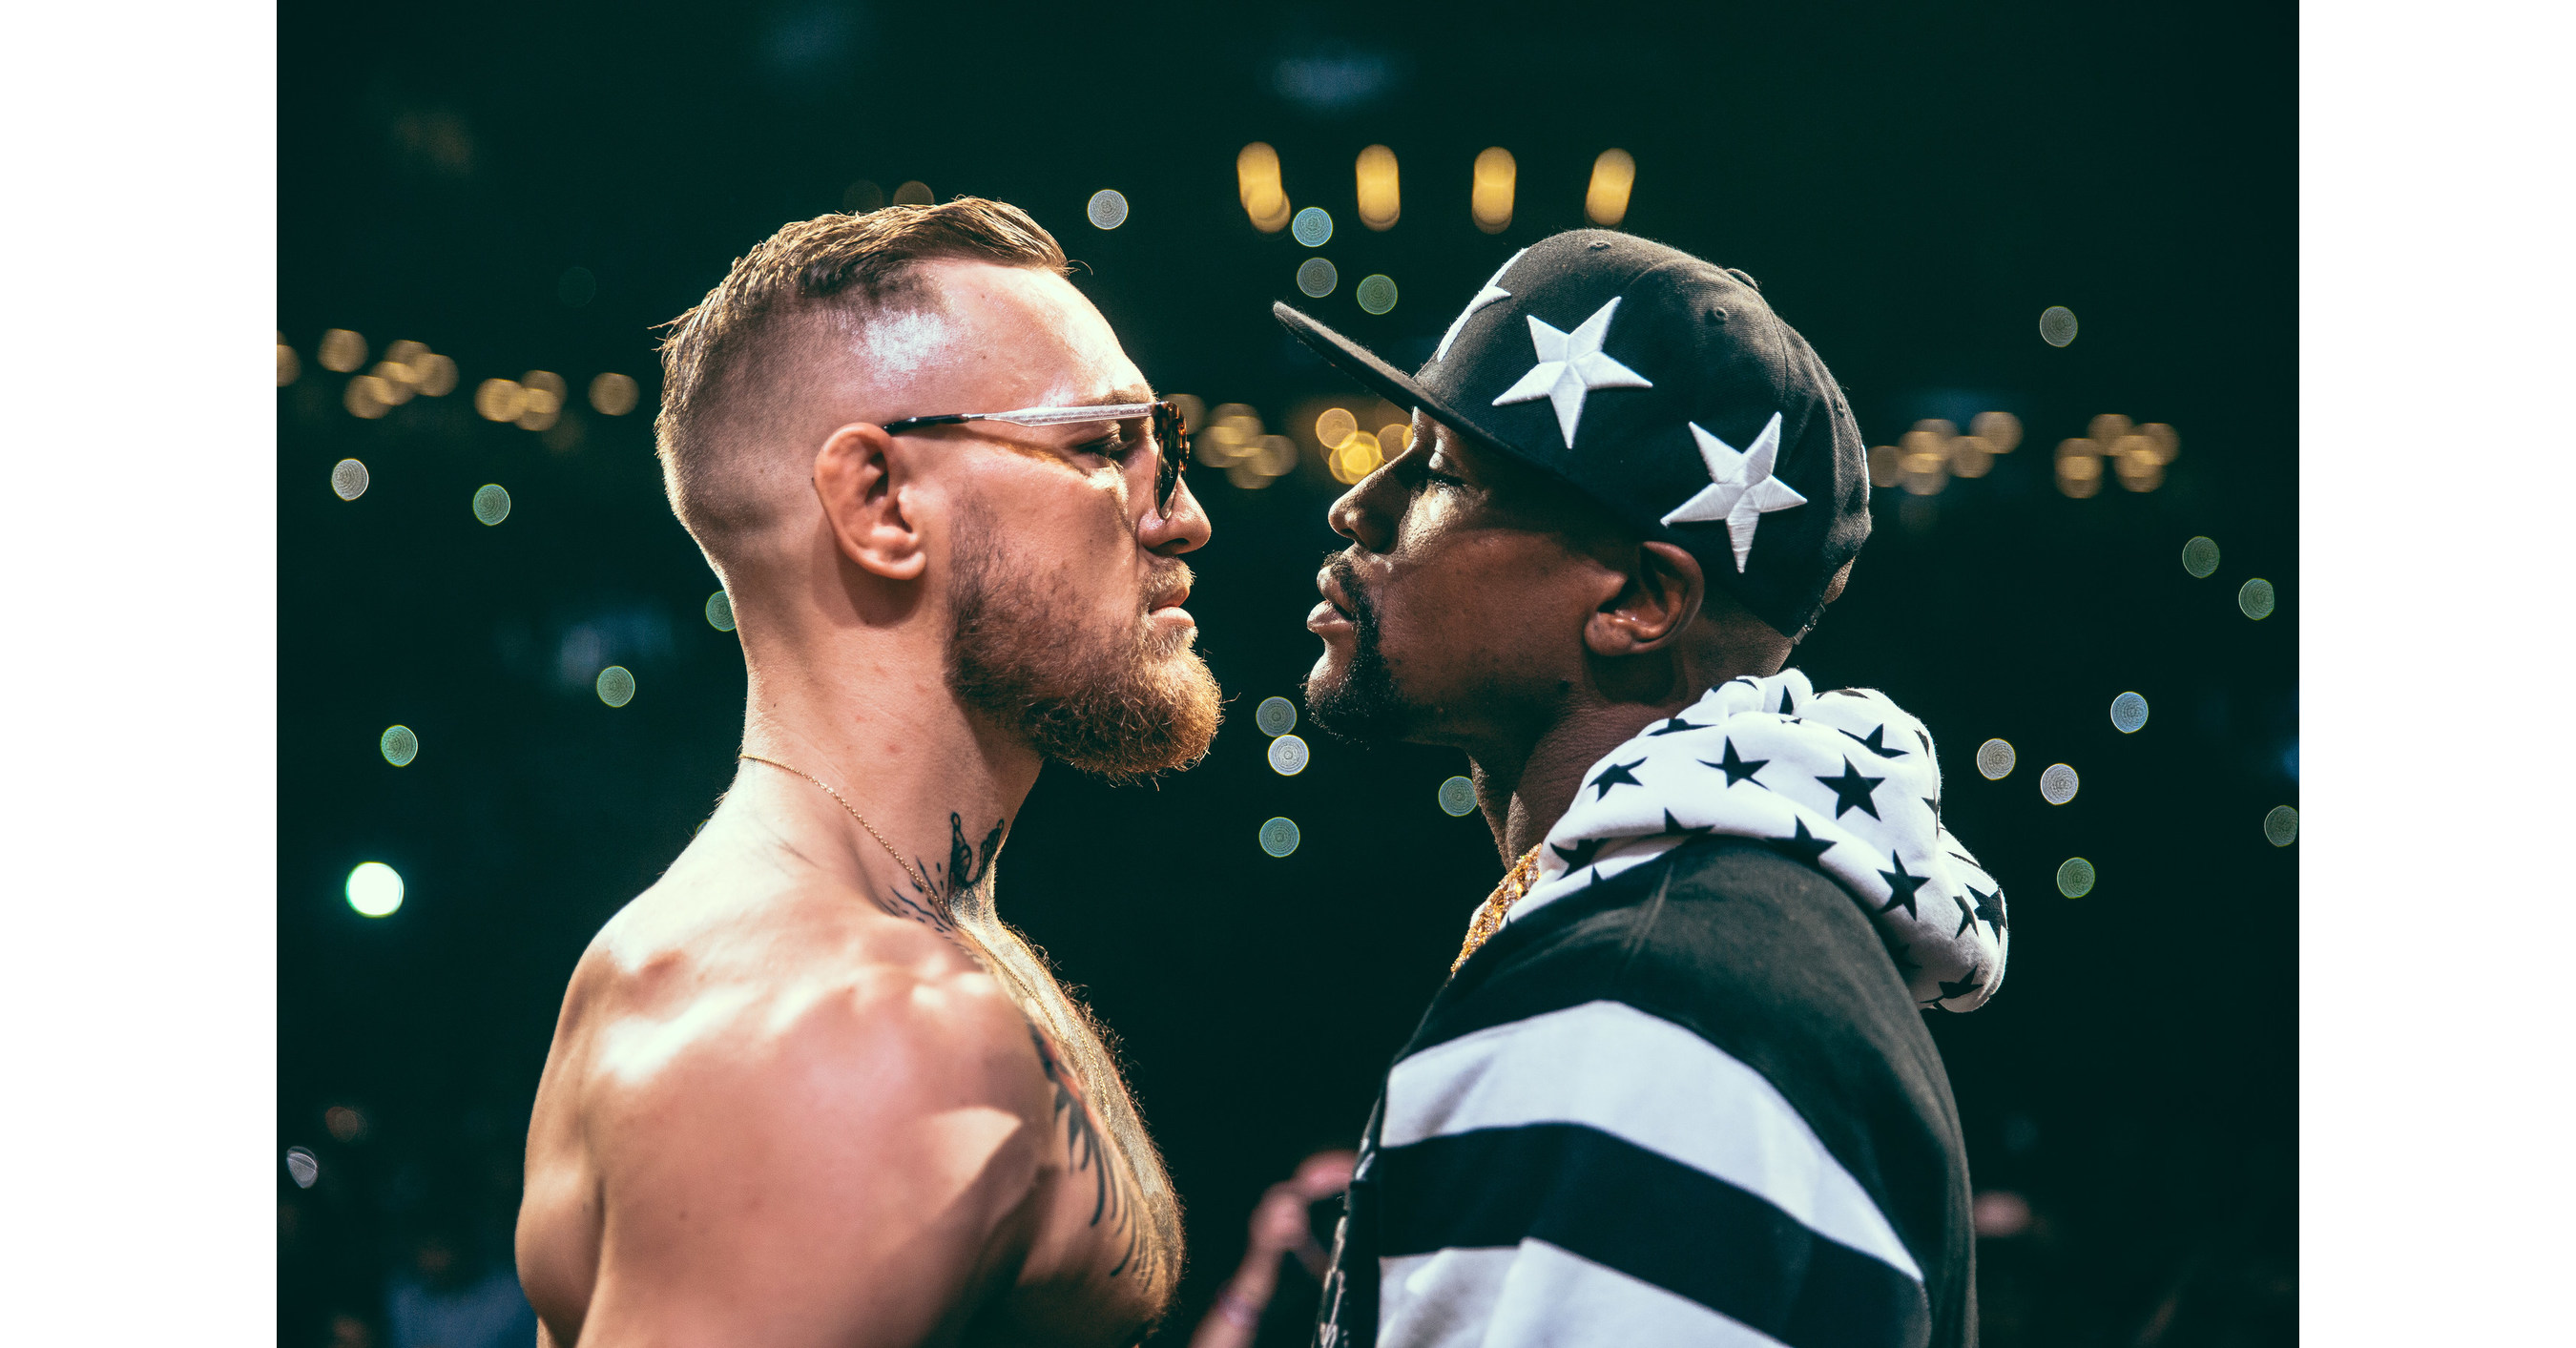 SHOWTIME PPV® Boxing Match Mayweather Vs. McGregor Stands To Be The